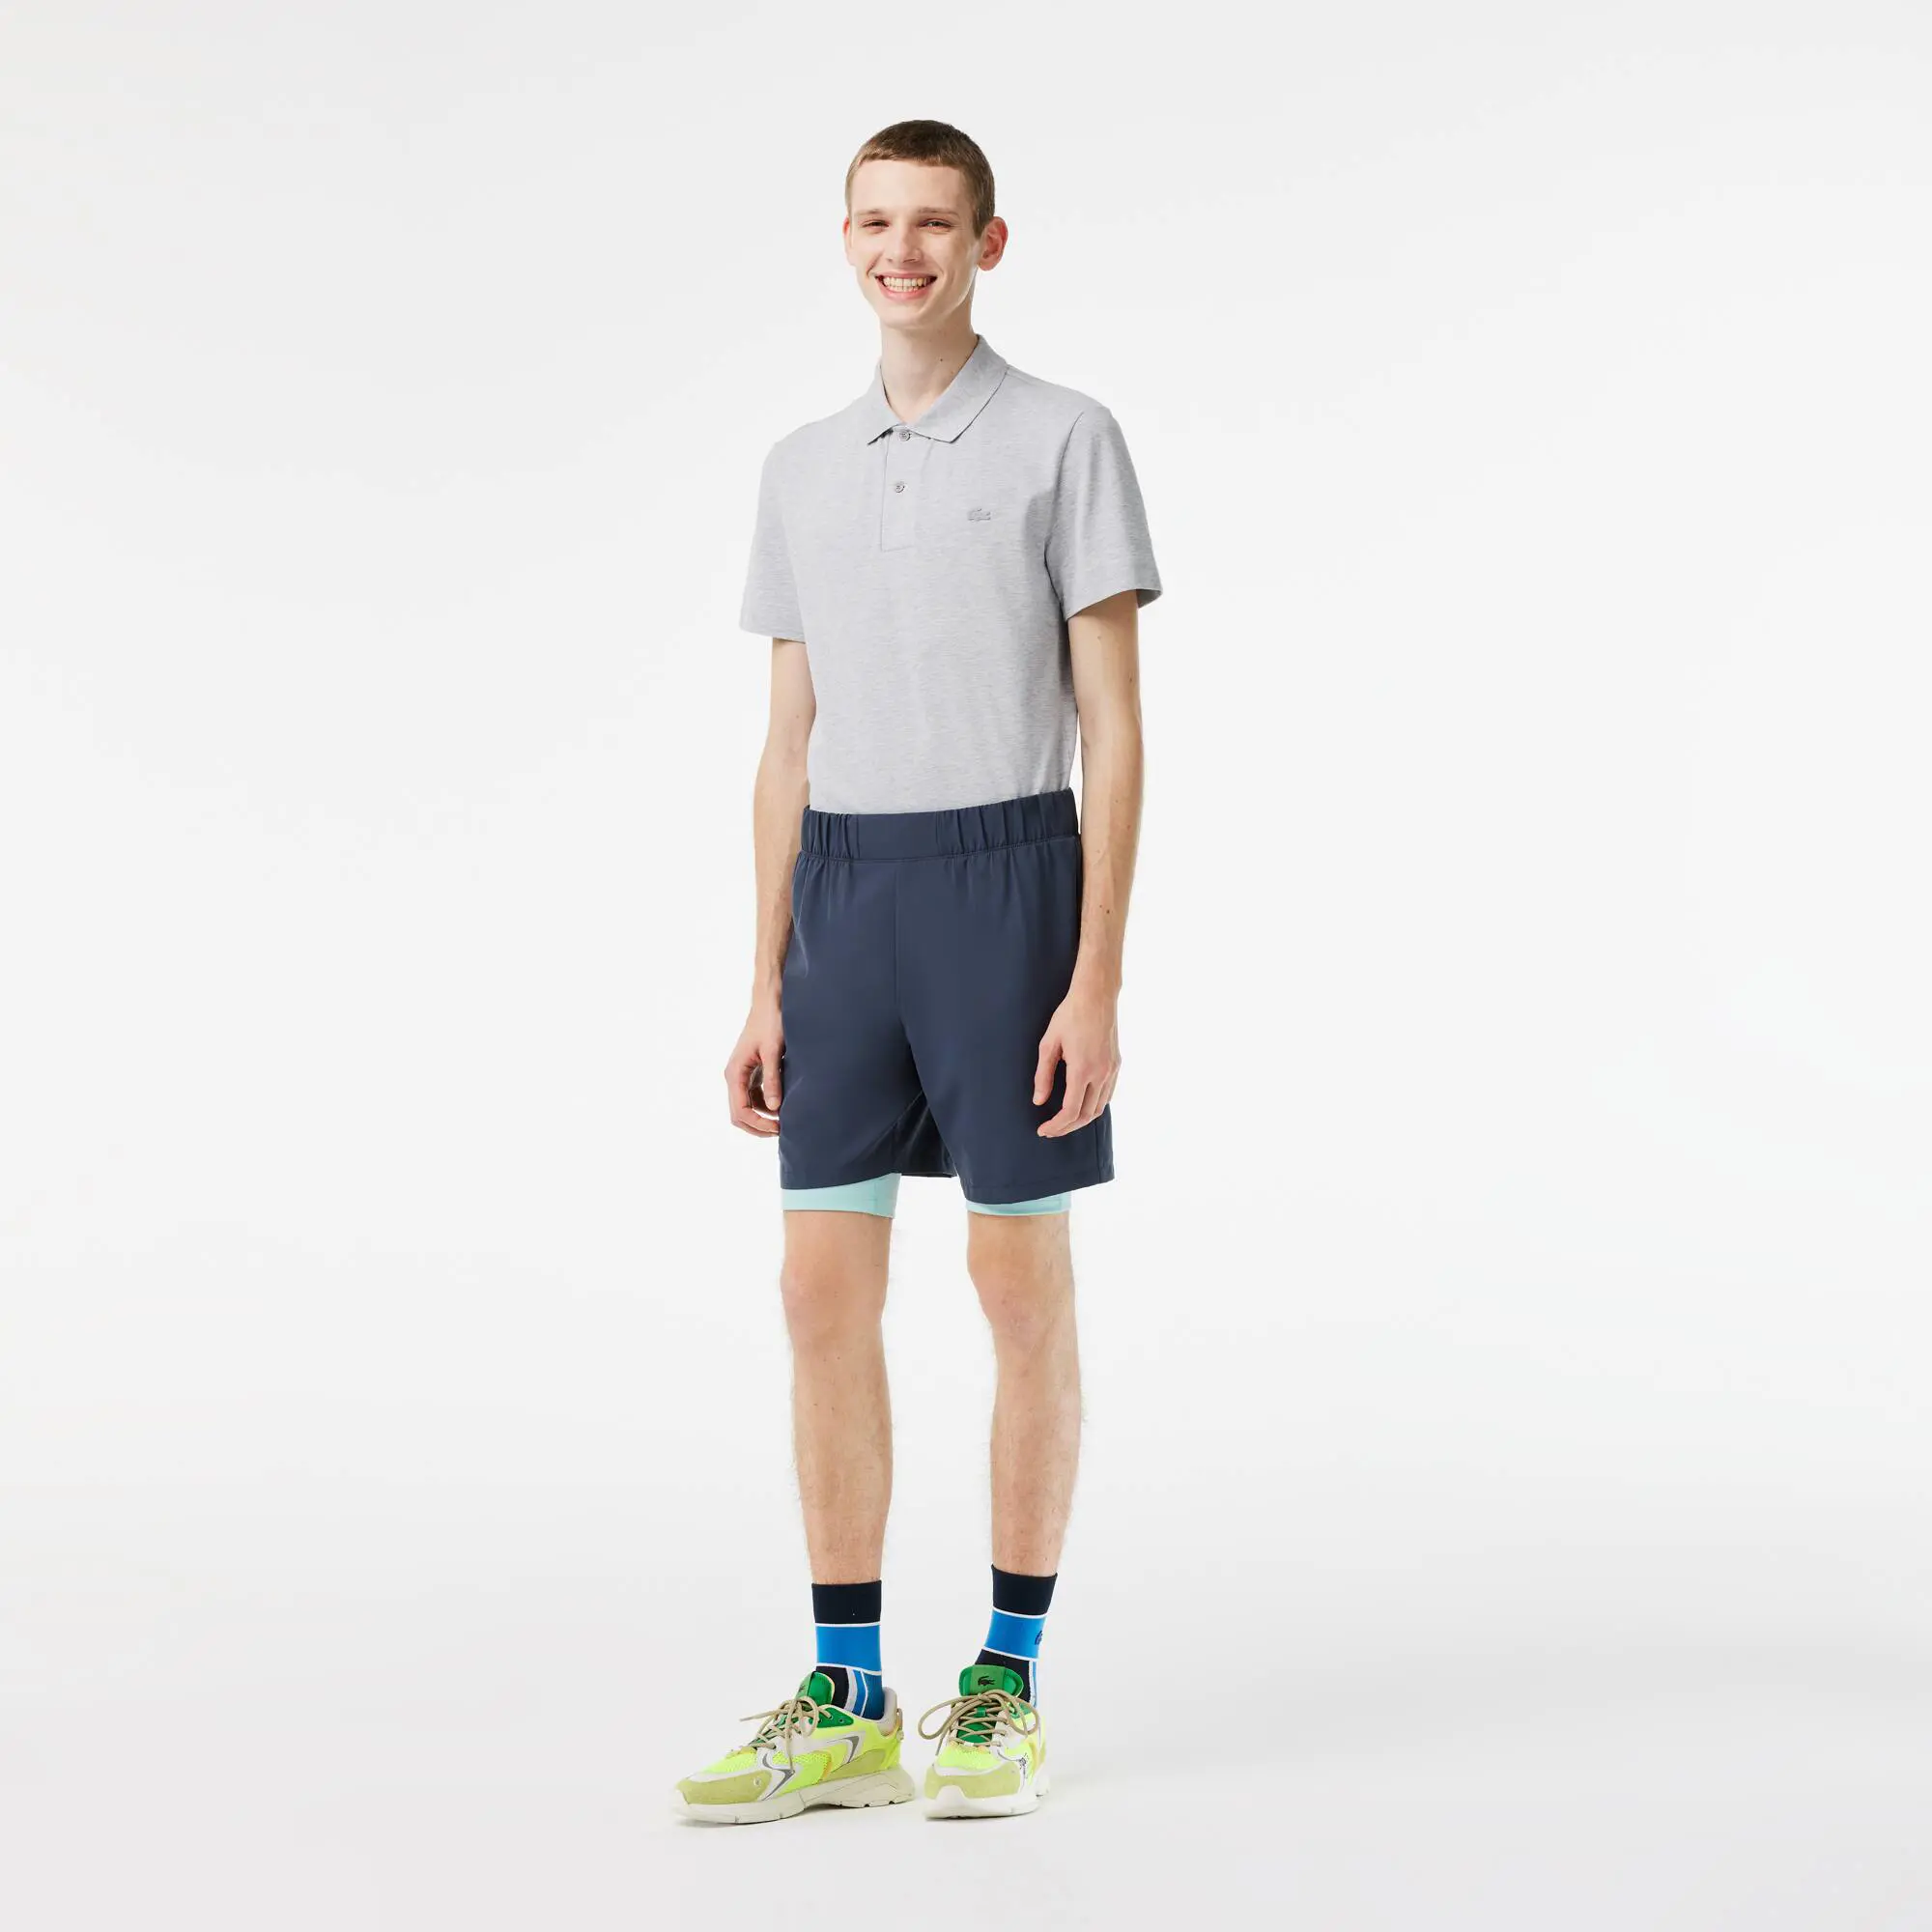 Lacoste Men’s Two-Tone Lacoste Sport Shorts with Built-in Undershorts. 1